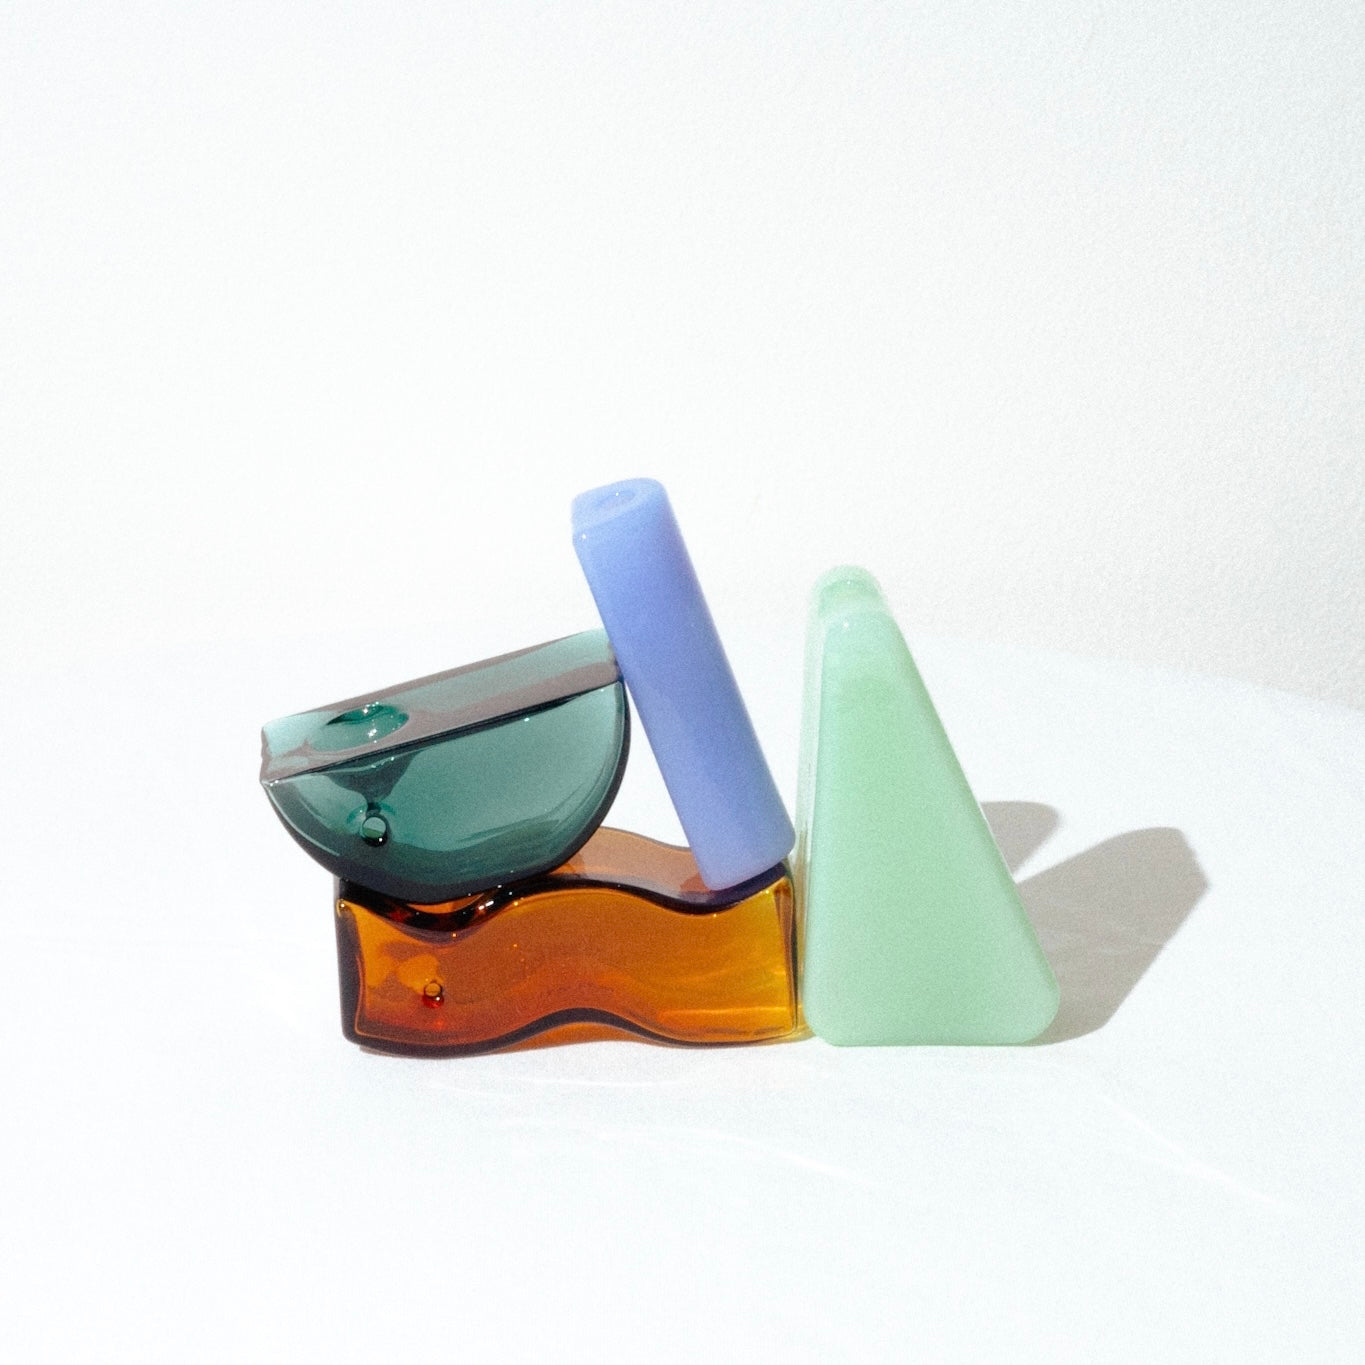 image of 4 yew yew glass pipes. a tubular solo pipe on the left in a milky blue, the amber wavy pipe, the green triangle pipe and then the teal half circle pipe. they are all either upright or on their side, in a formation